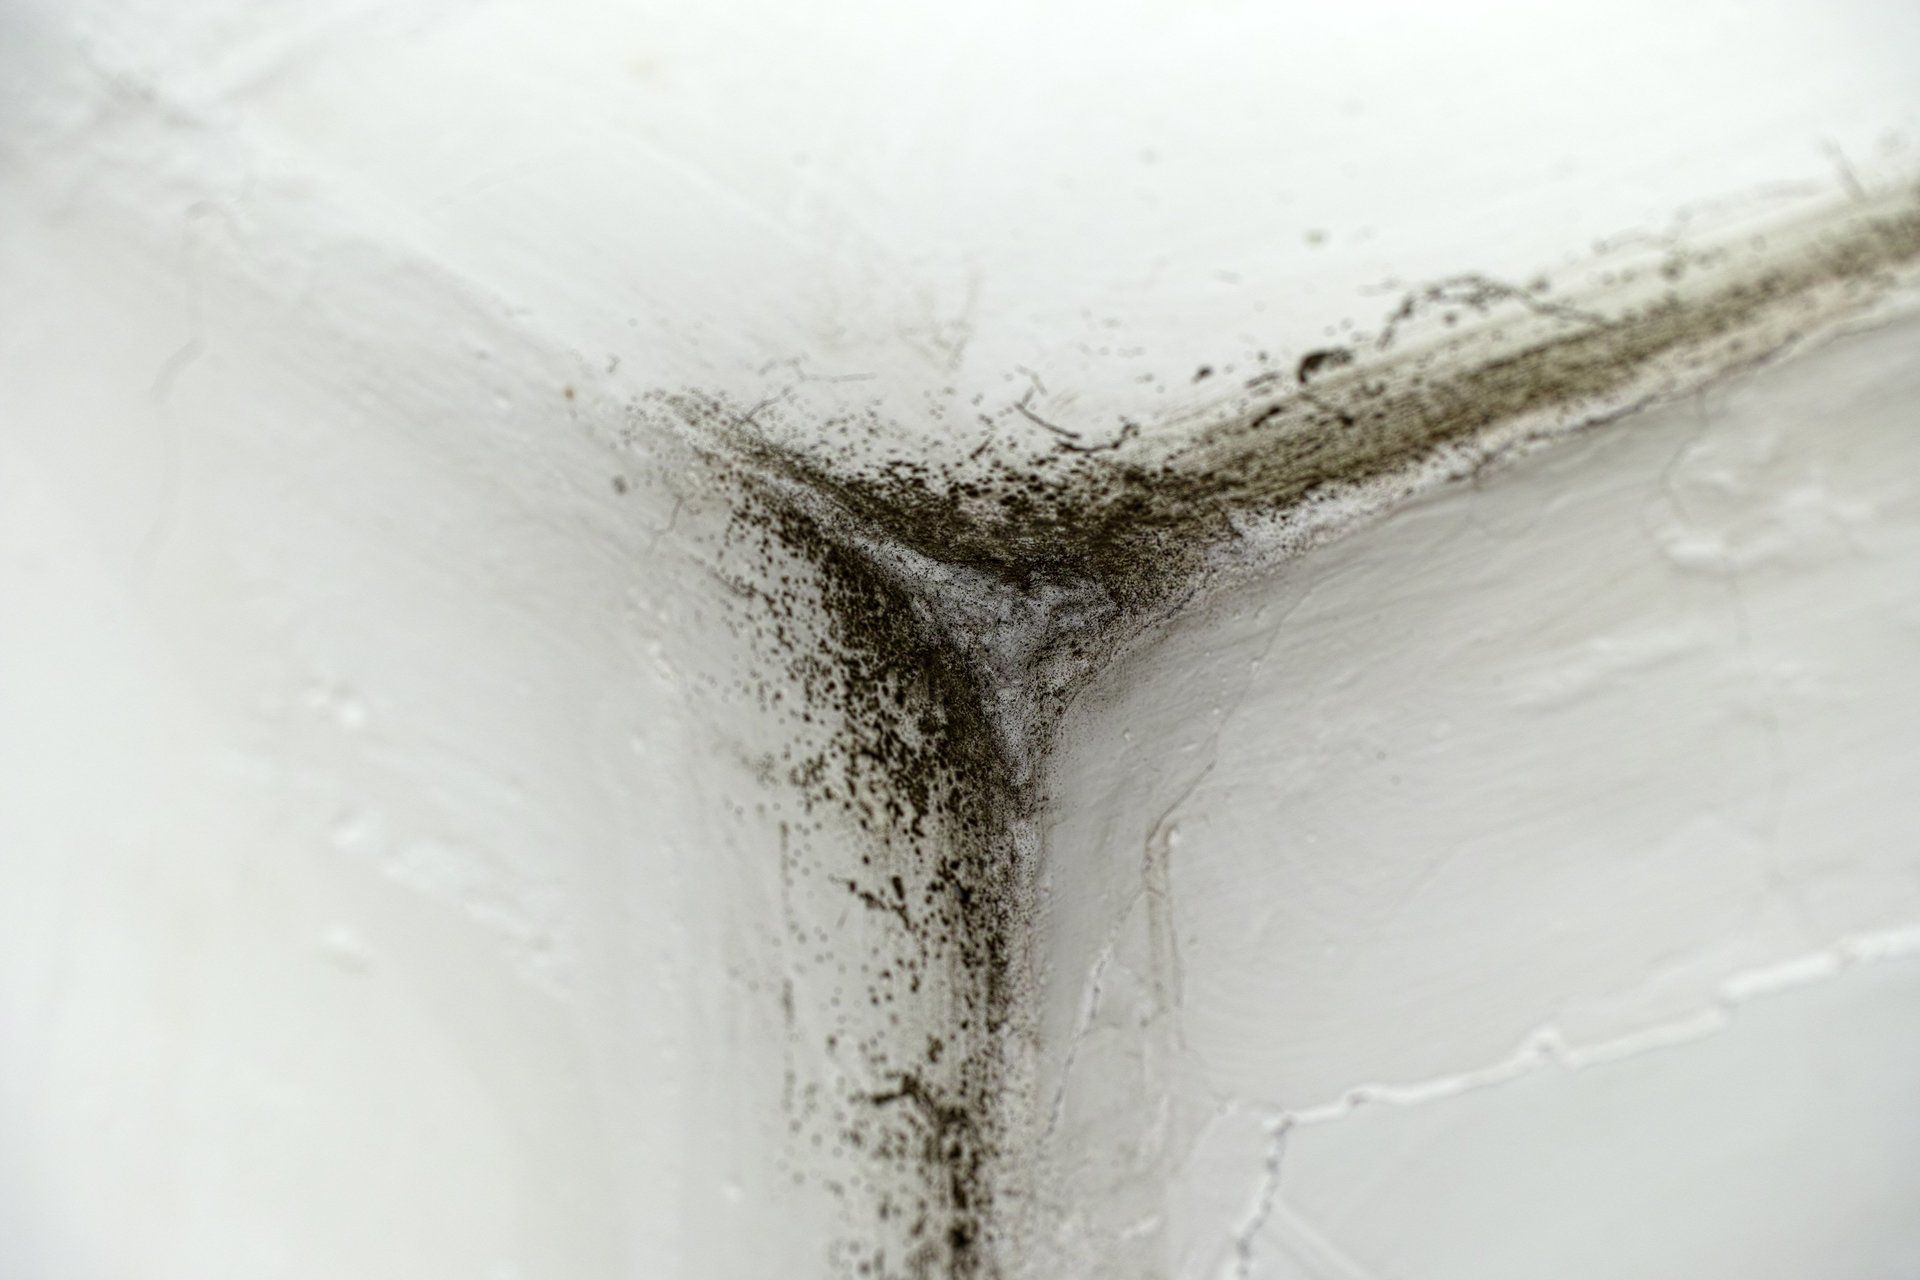 How To Test For Black Mold In House